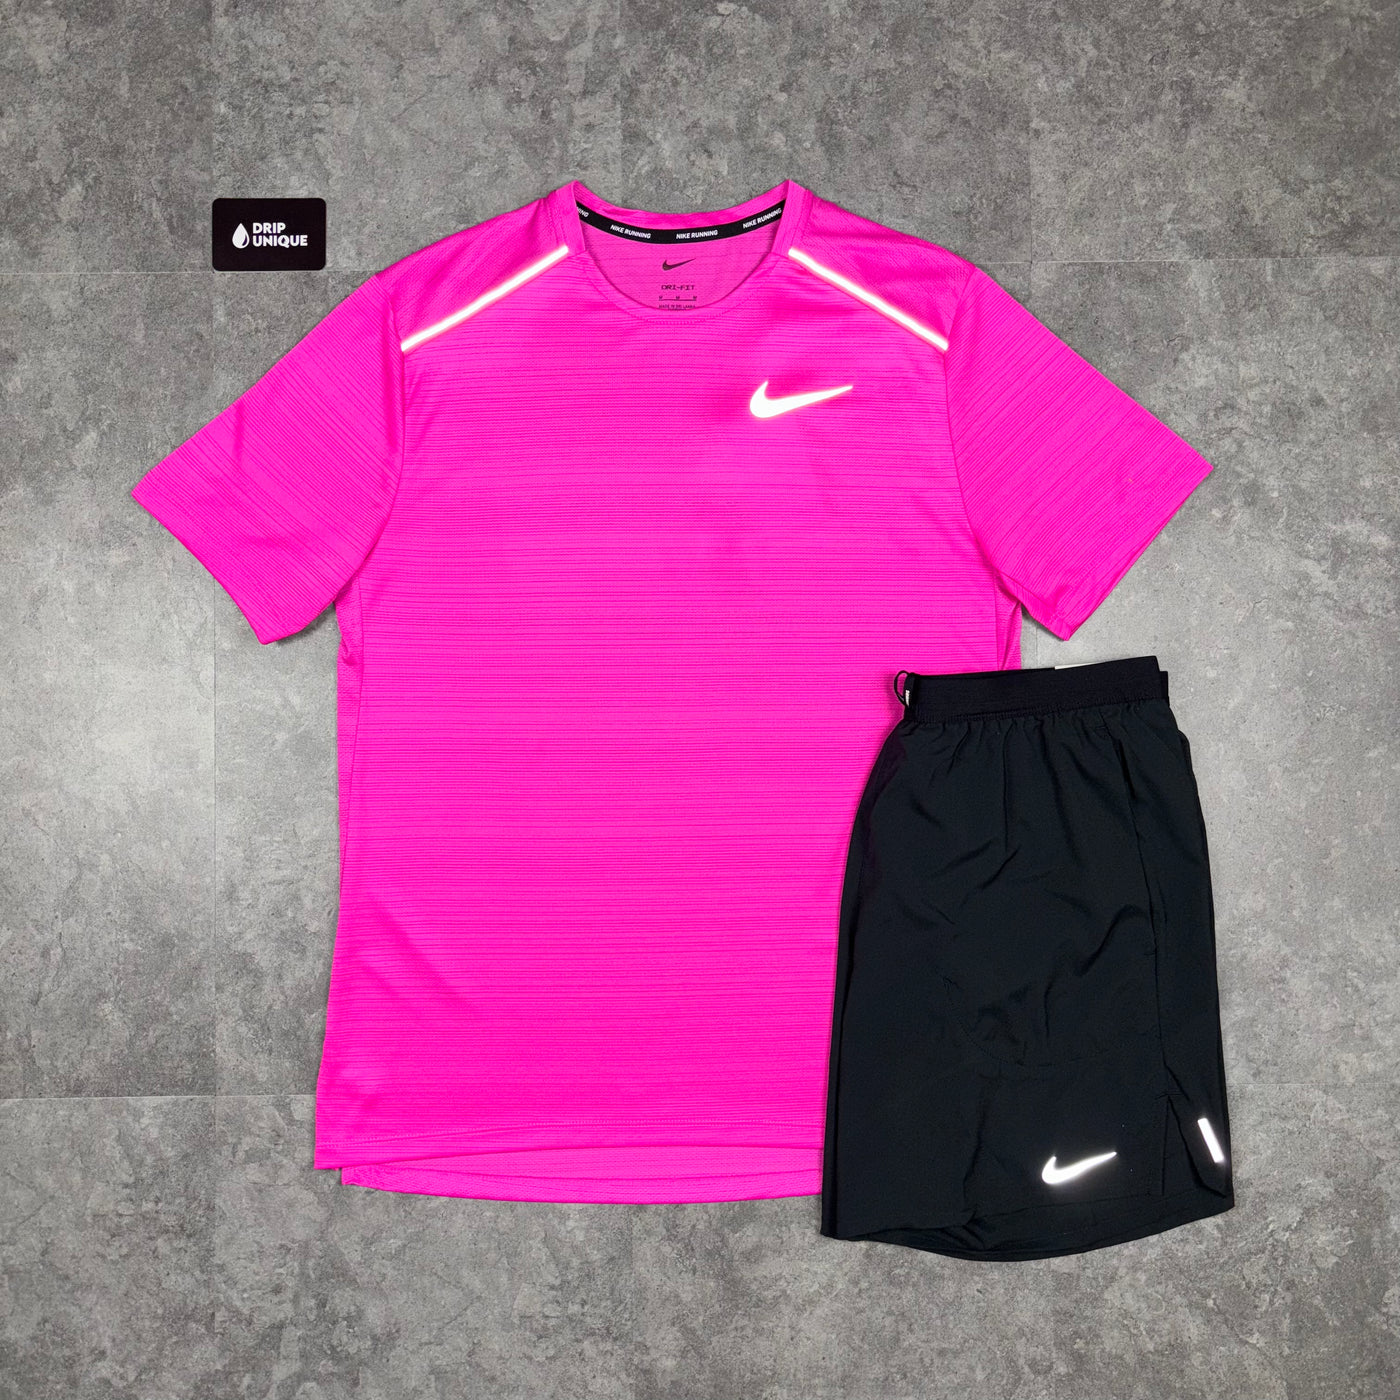 Men's Nike Miler T-Shirt Hot Pink, paired with the black flex stride shorts from Nike, dripuniqueuk